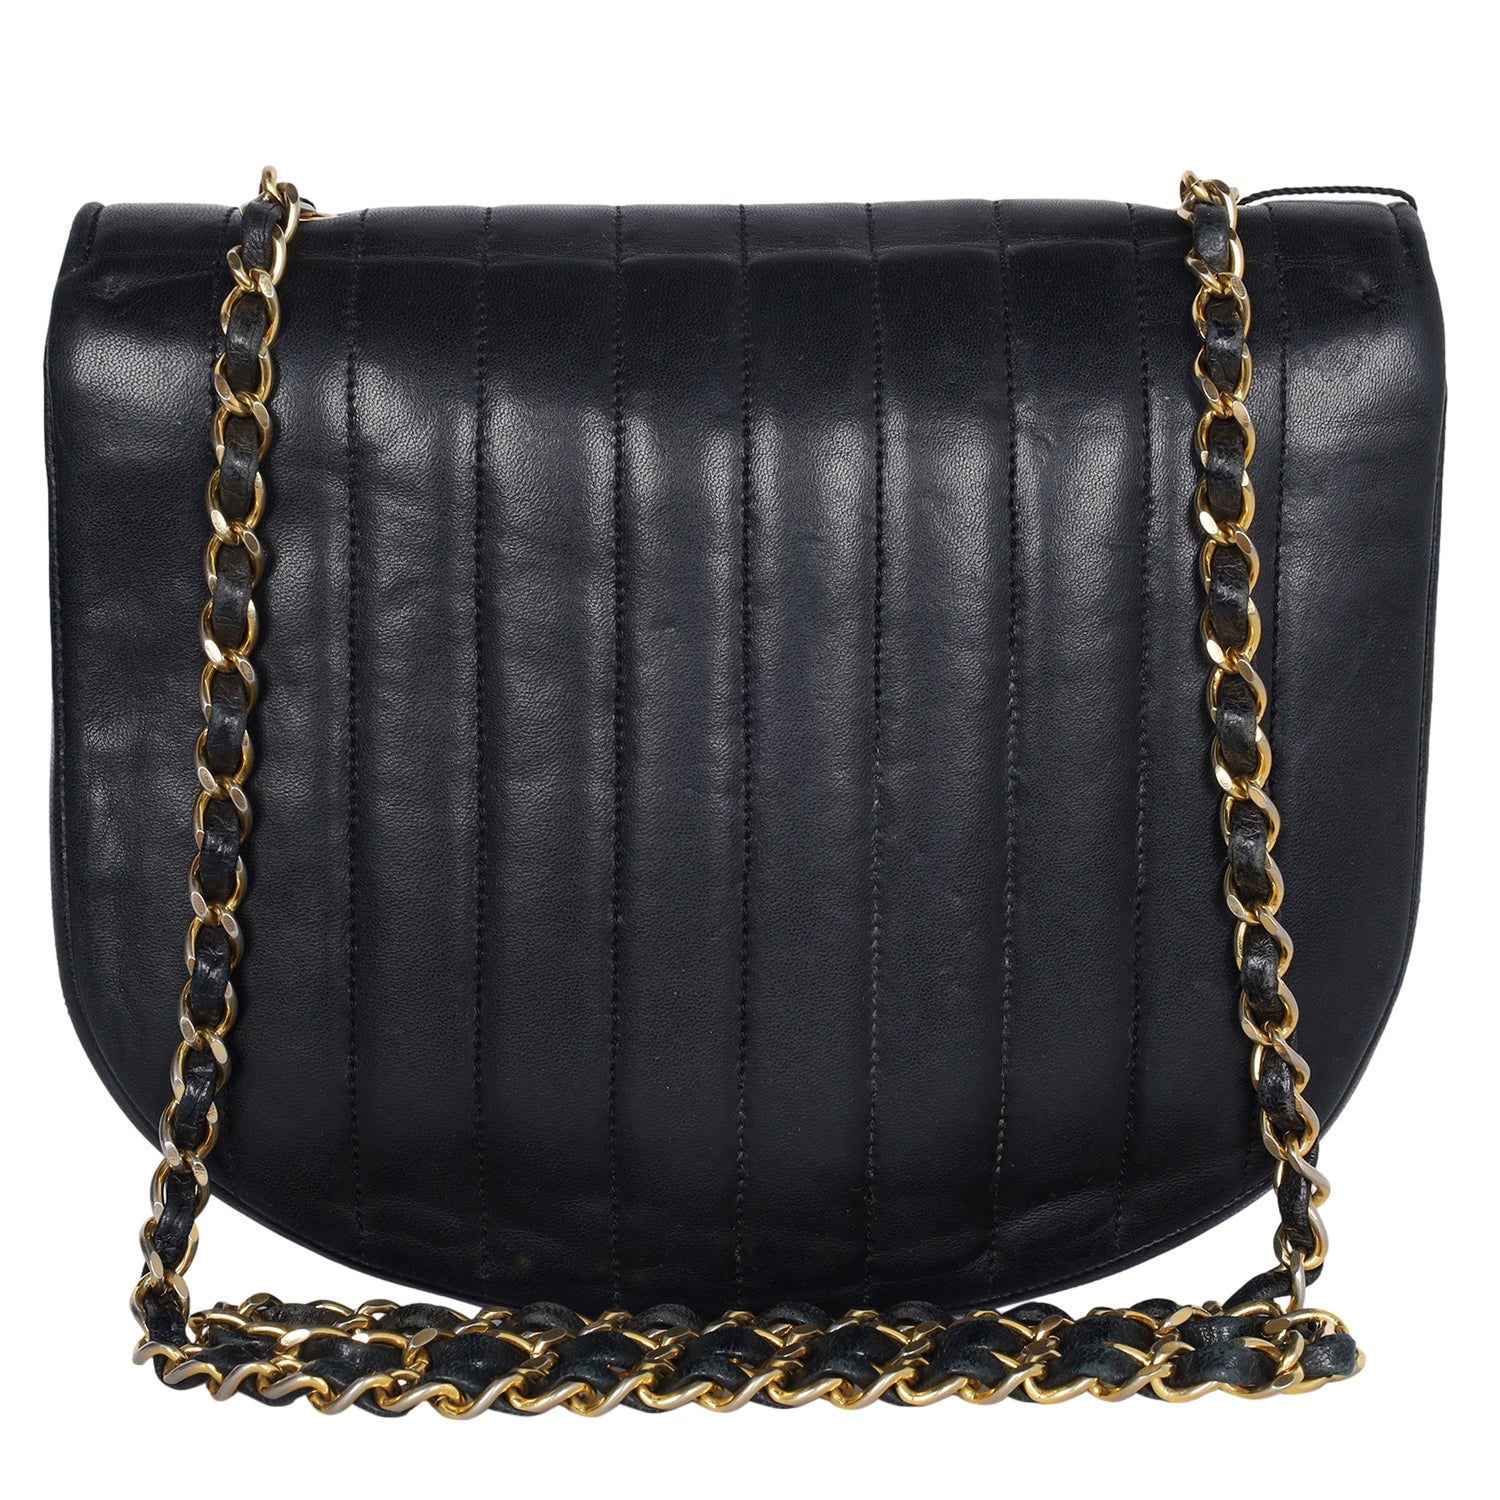 Chanel Black Patent Leather Half Moon Clutch